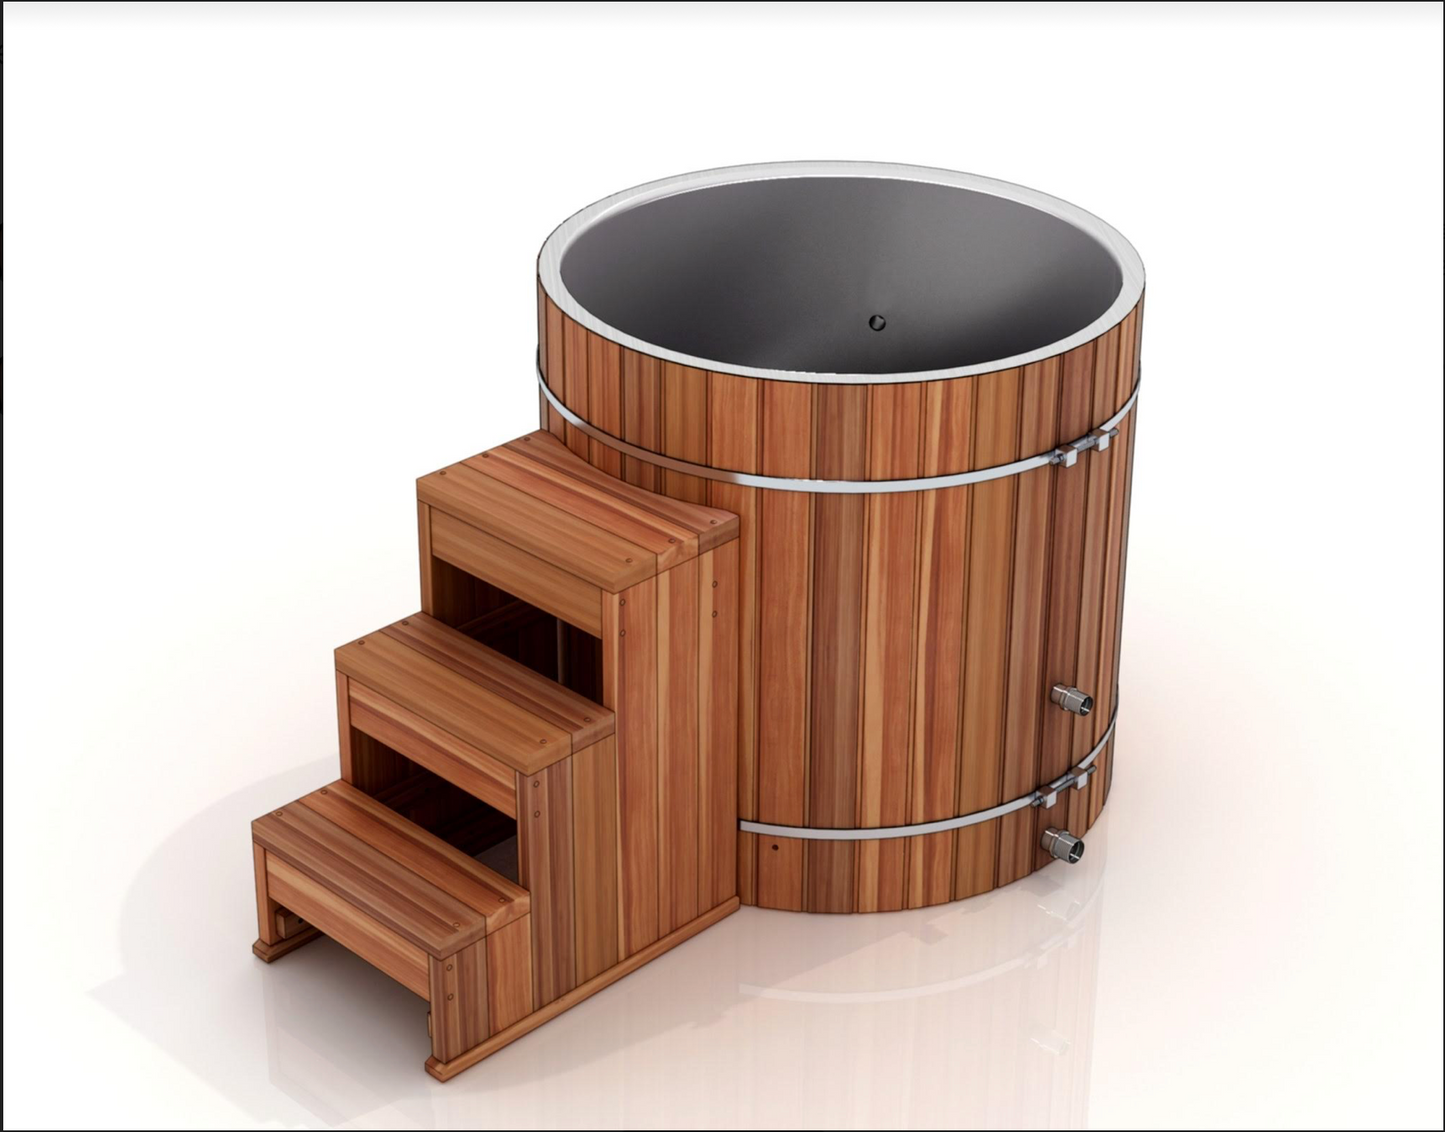 Dynamic Cold Therapy Barrel Spa Stainless Steel w/ Pacific Cedar Exterior & Hot/Cold Motor